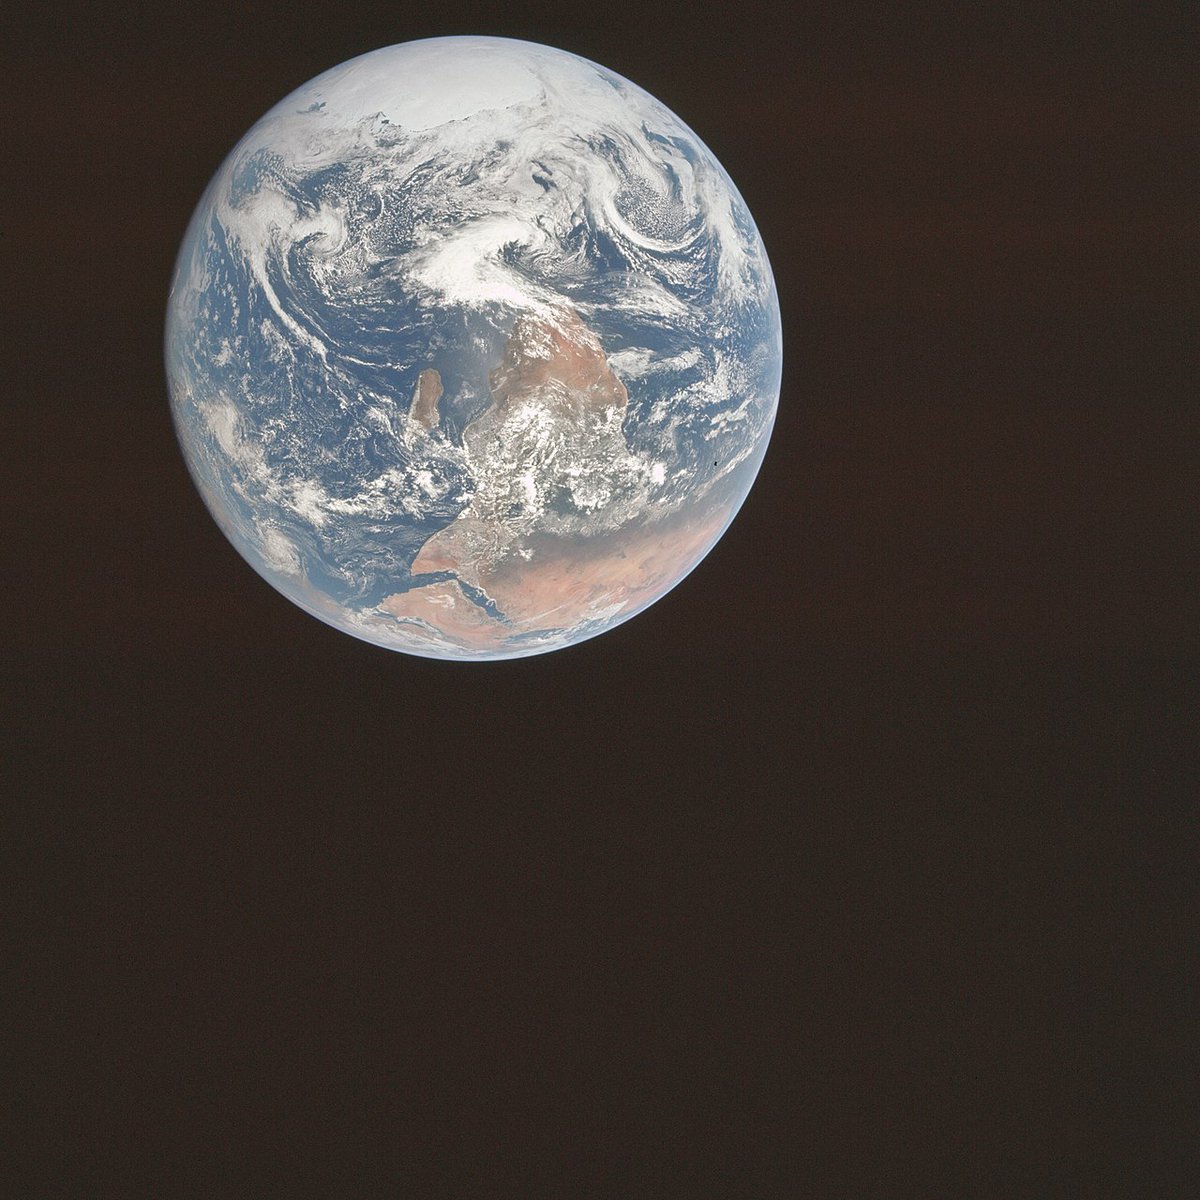 Earth Day.

This is AS17-148-22727, otherwise known as the Blue Marble. It is a real, full, unedited photograph of our planet taken by a film camera held by human hands at an altitude of ~29, 400 km, in 1972.

No other photo quite like this will ever exist, in my opinion.